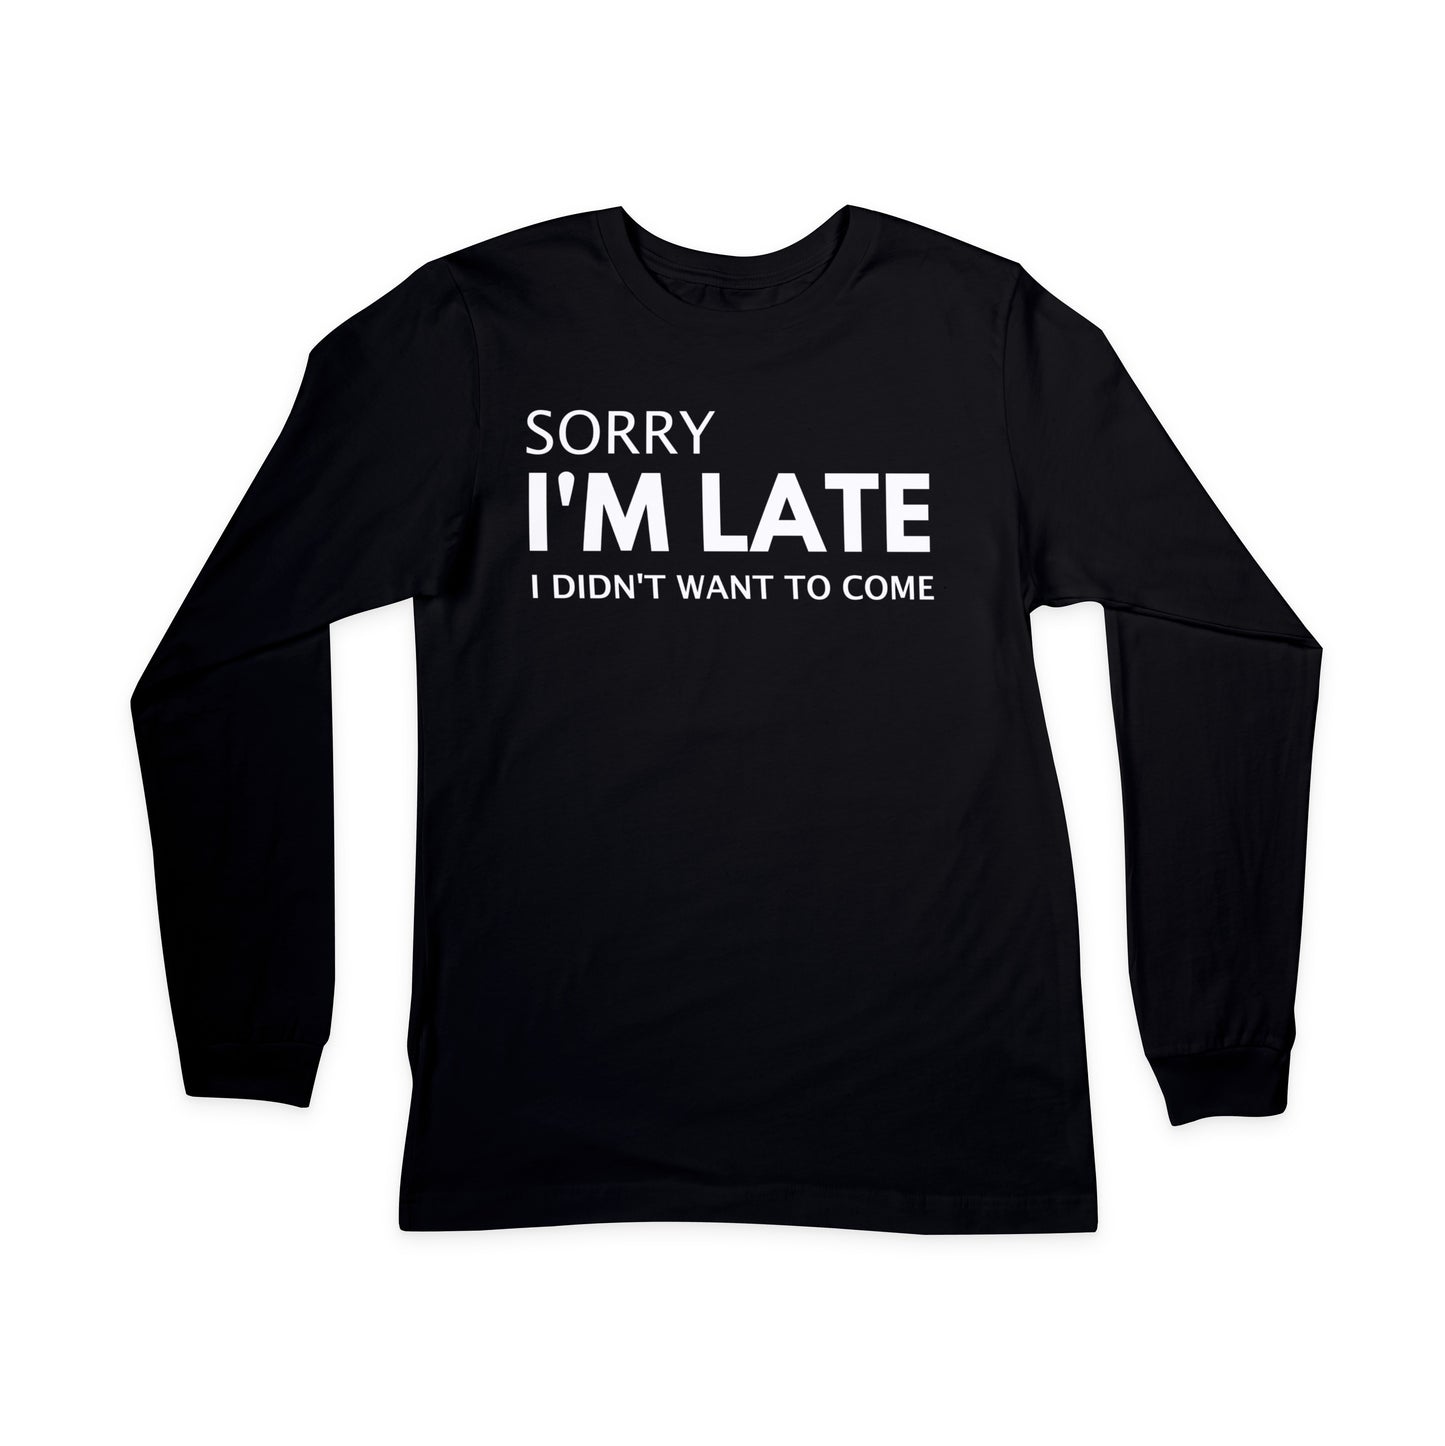 Sorry I'm Late I Didn't Want to Come - Long Sleeved T-Shirt